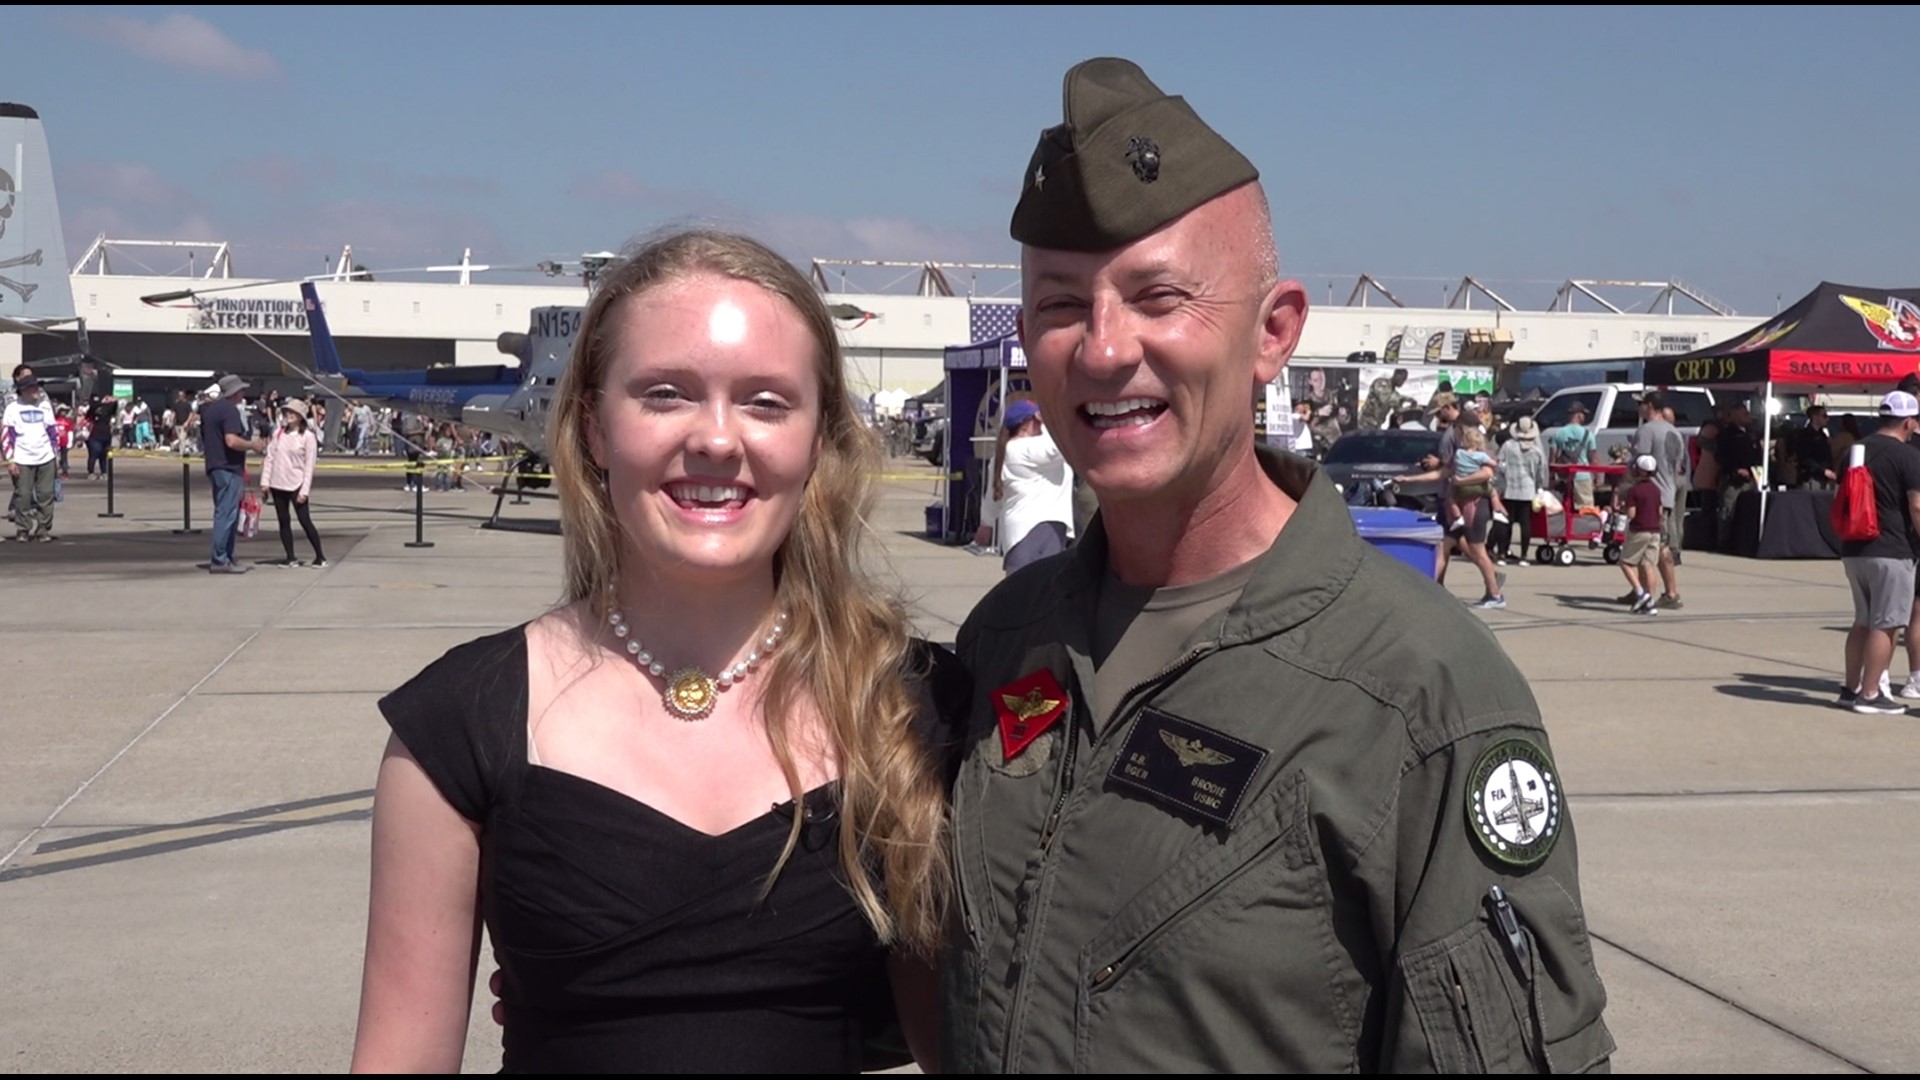 Lily Brodie sang the National Anthem for the first time alongside her father, Bob Brodie, who is an Assistant Wing Commander for the Third Marine Aircraft Wing.